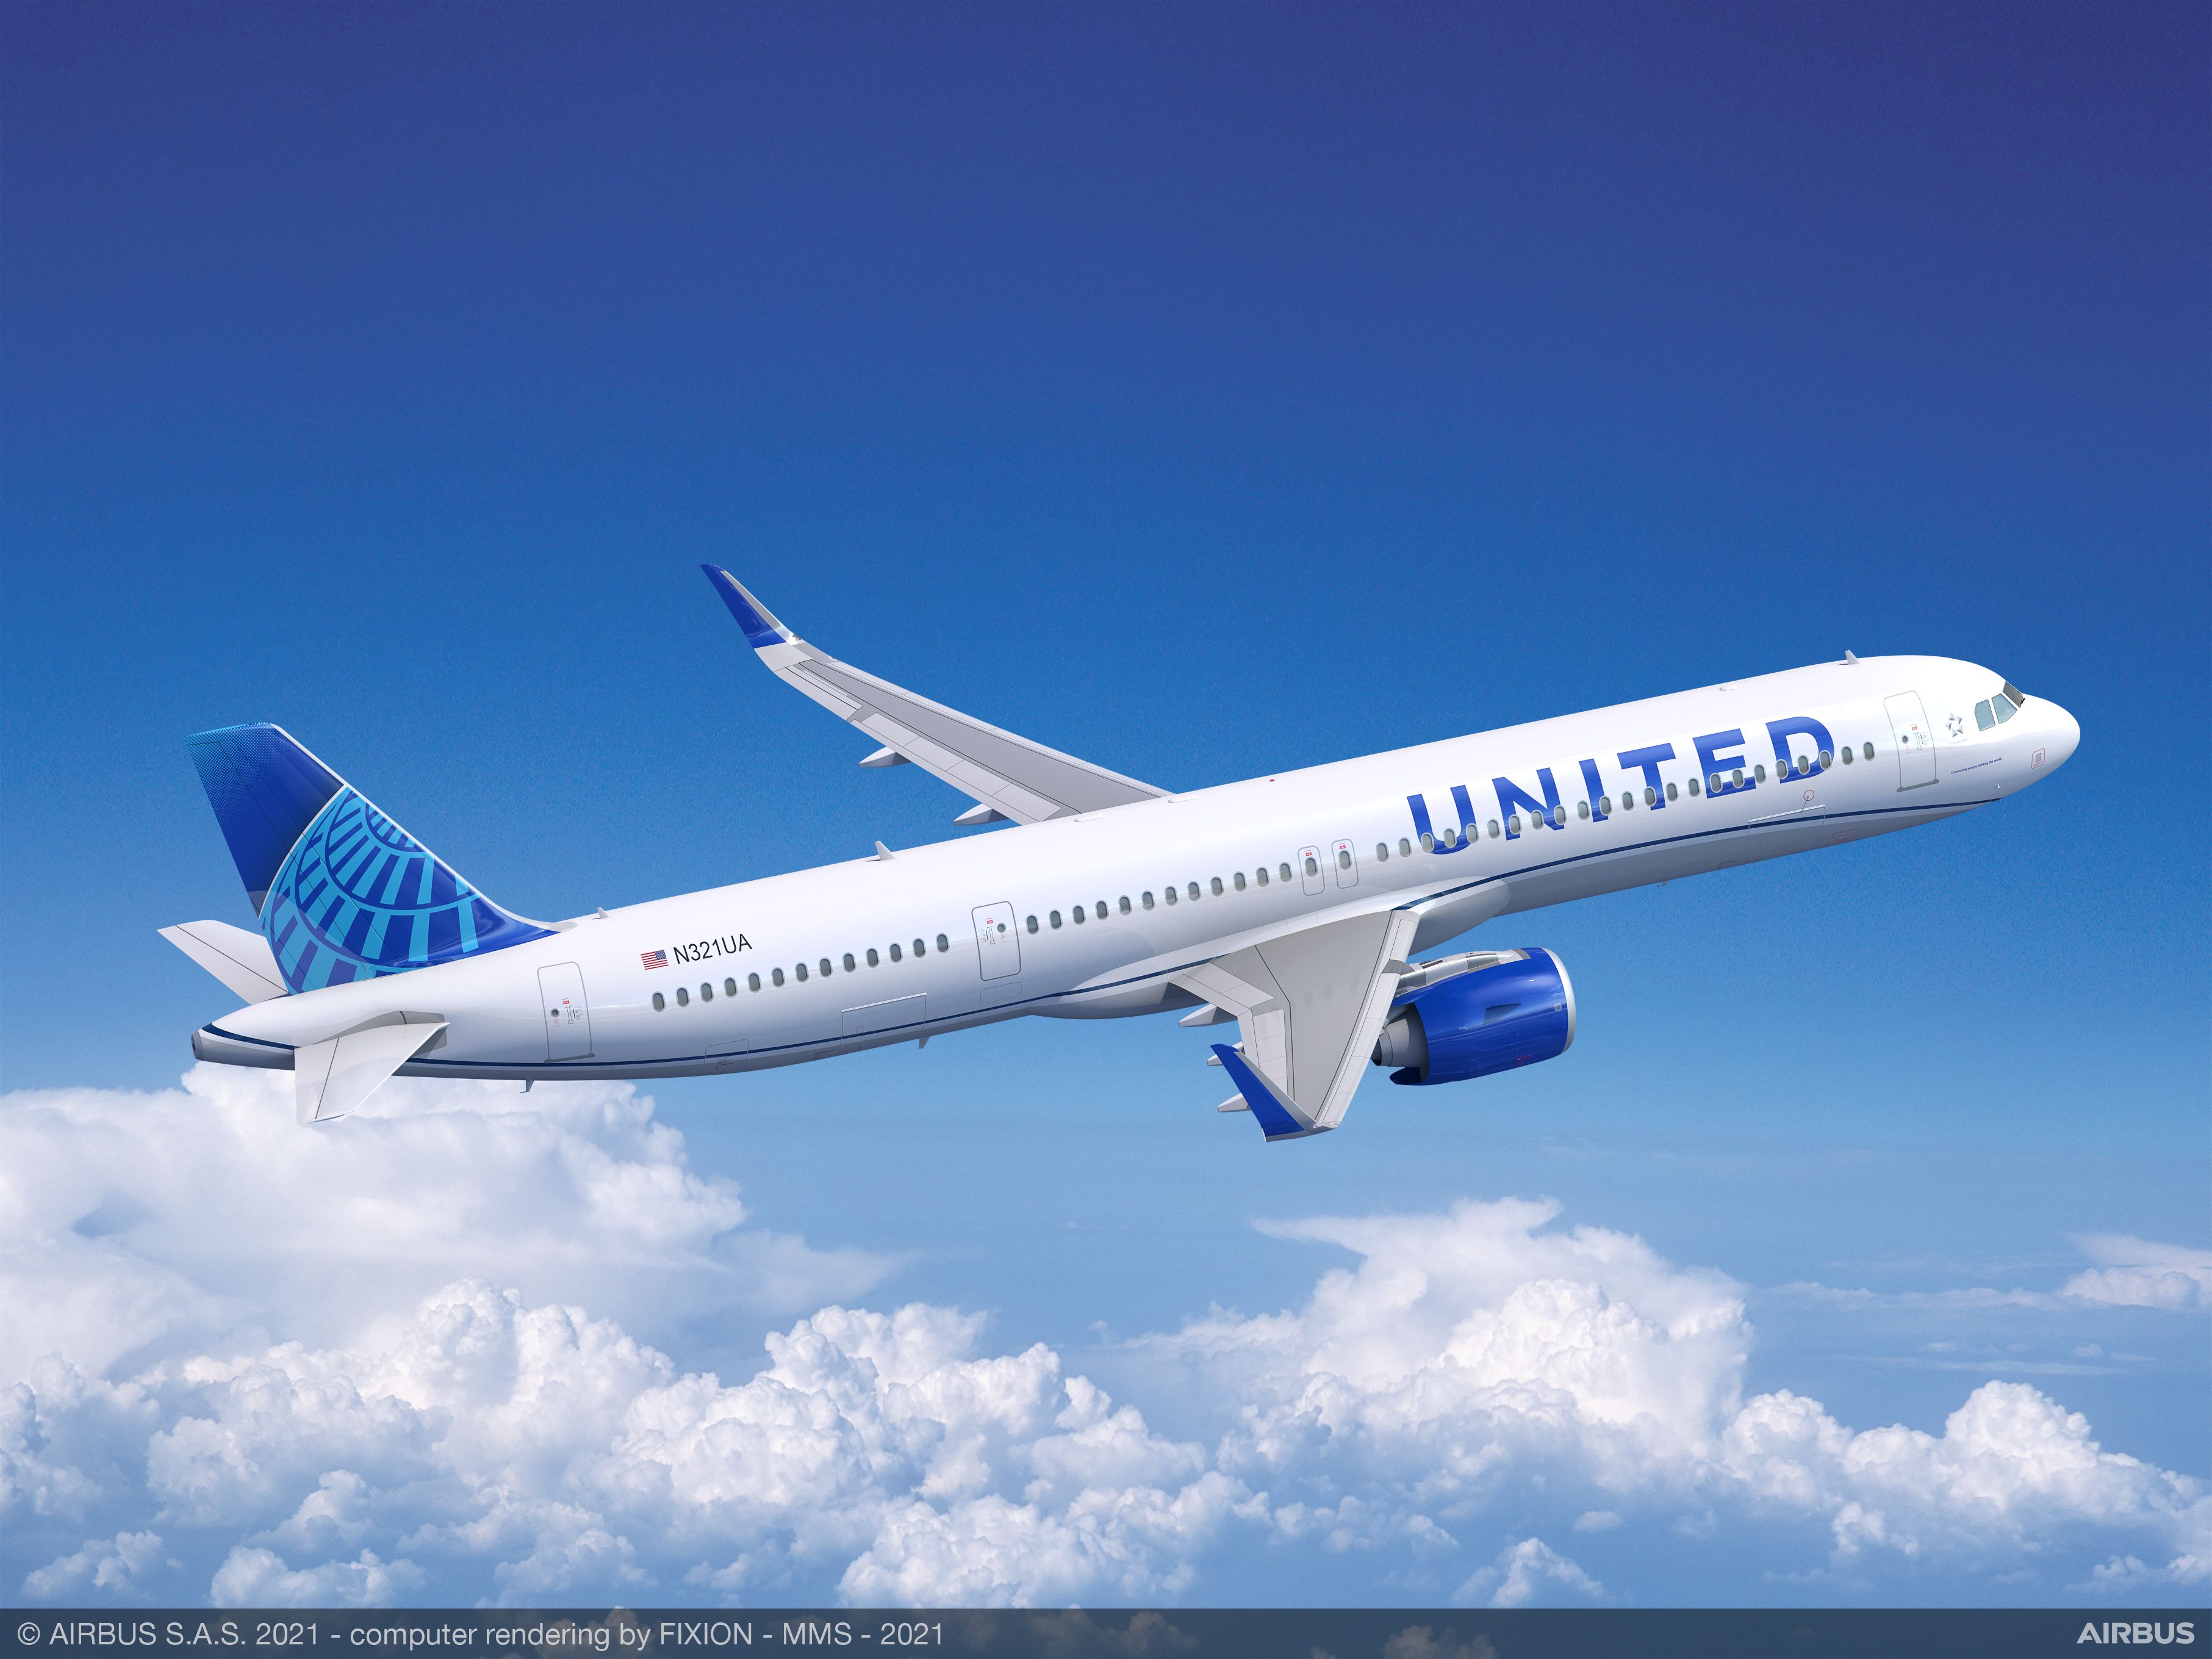 United Airlines has placed an order for 70 Airbus A321neo aircraft.